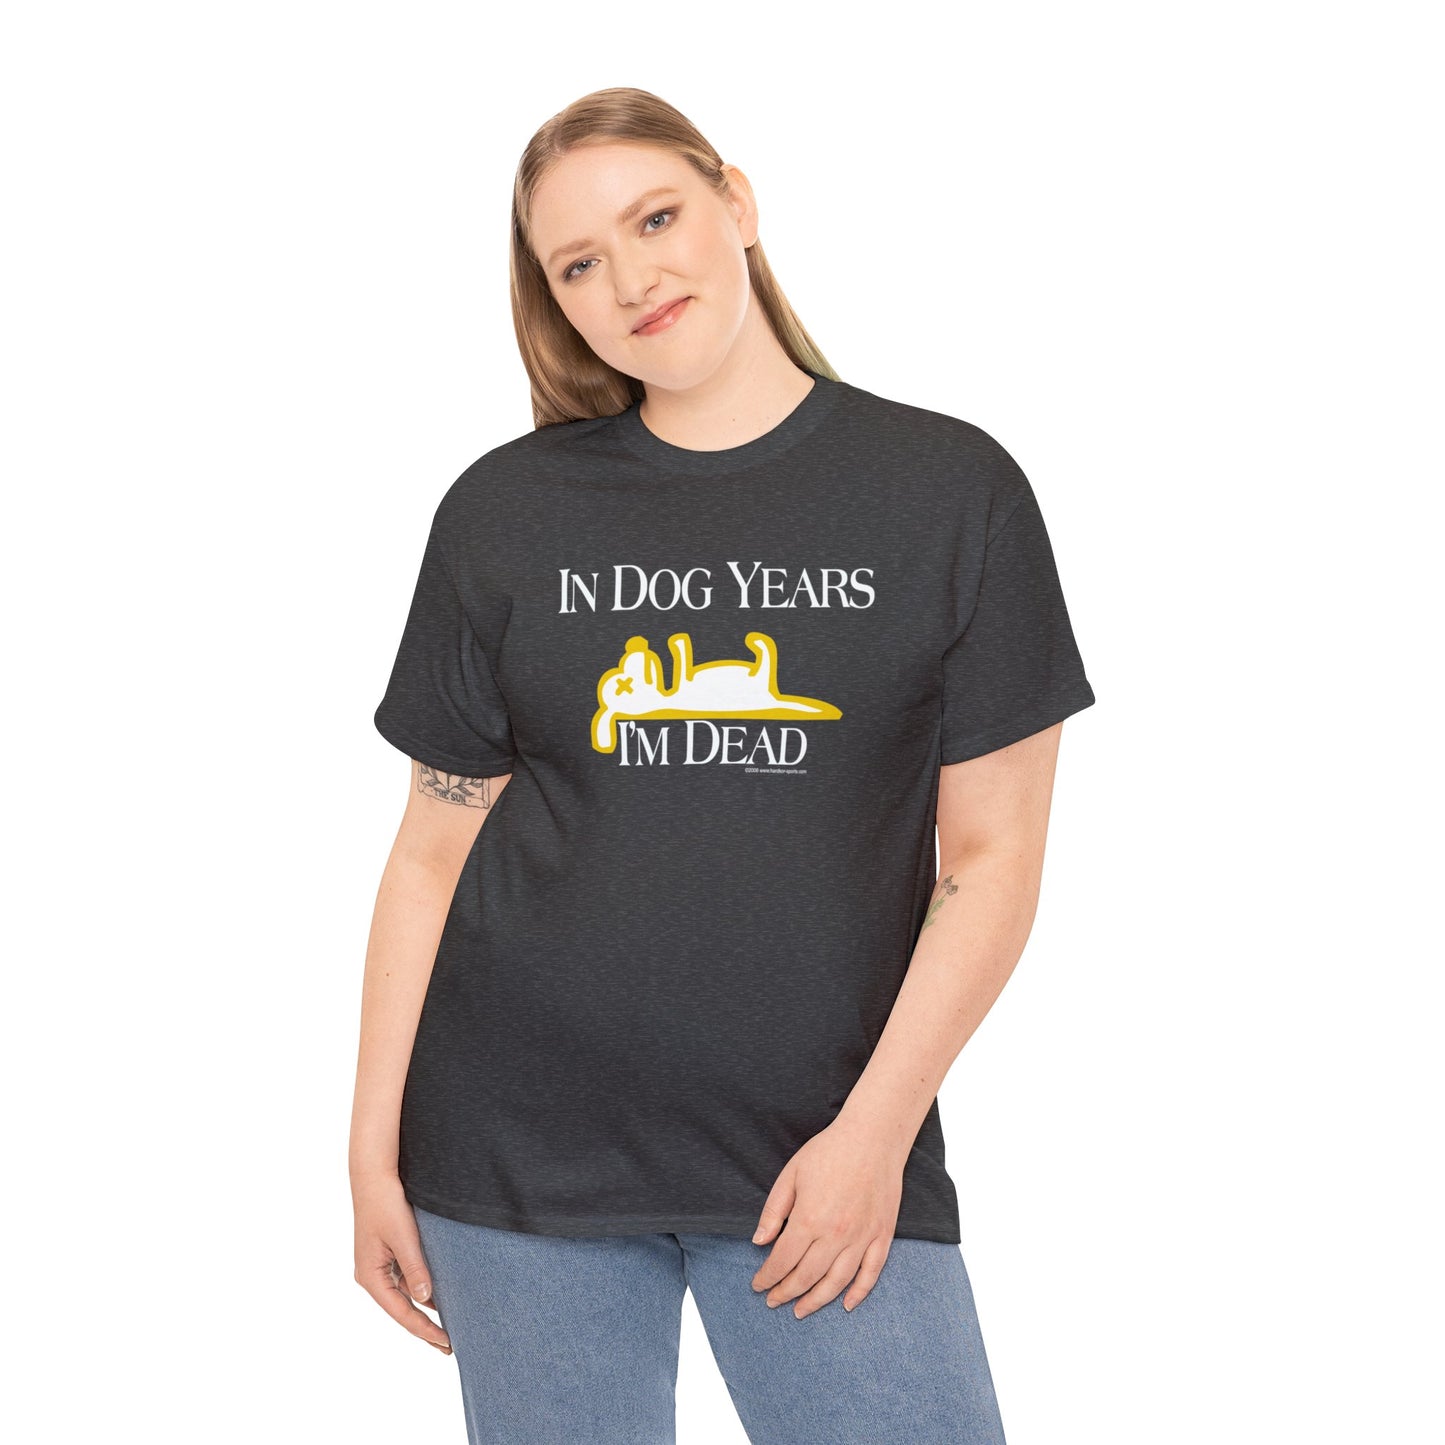 In Dog Years, I'm Dead, funny t-shirt, Over the Hill T, Senior Citizen, Birthday T-Shirt, Dog Lovers Tee, humorous t-shirt, ironic t-shirt,